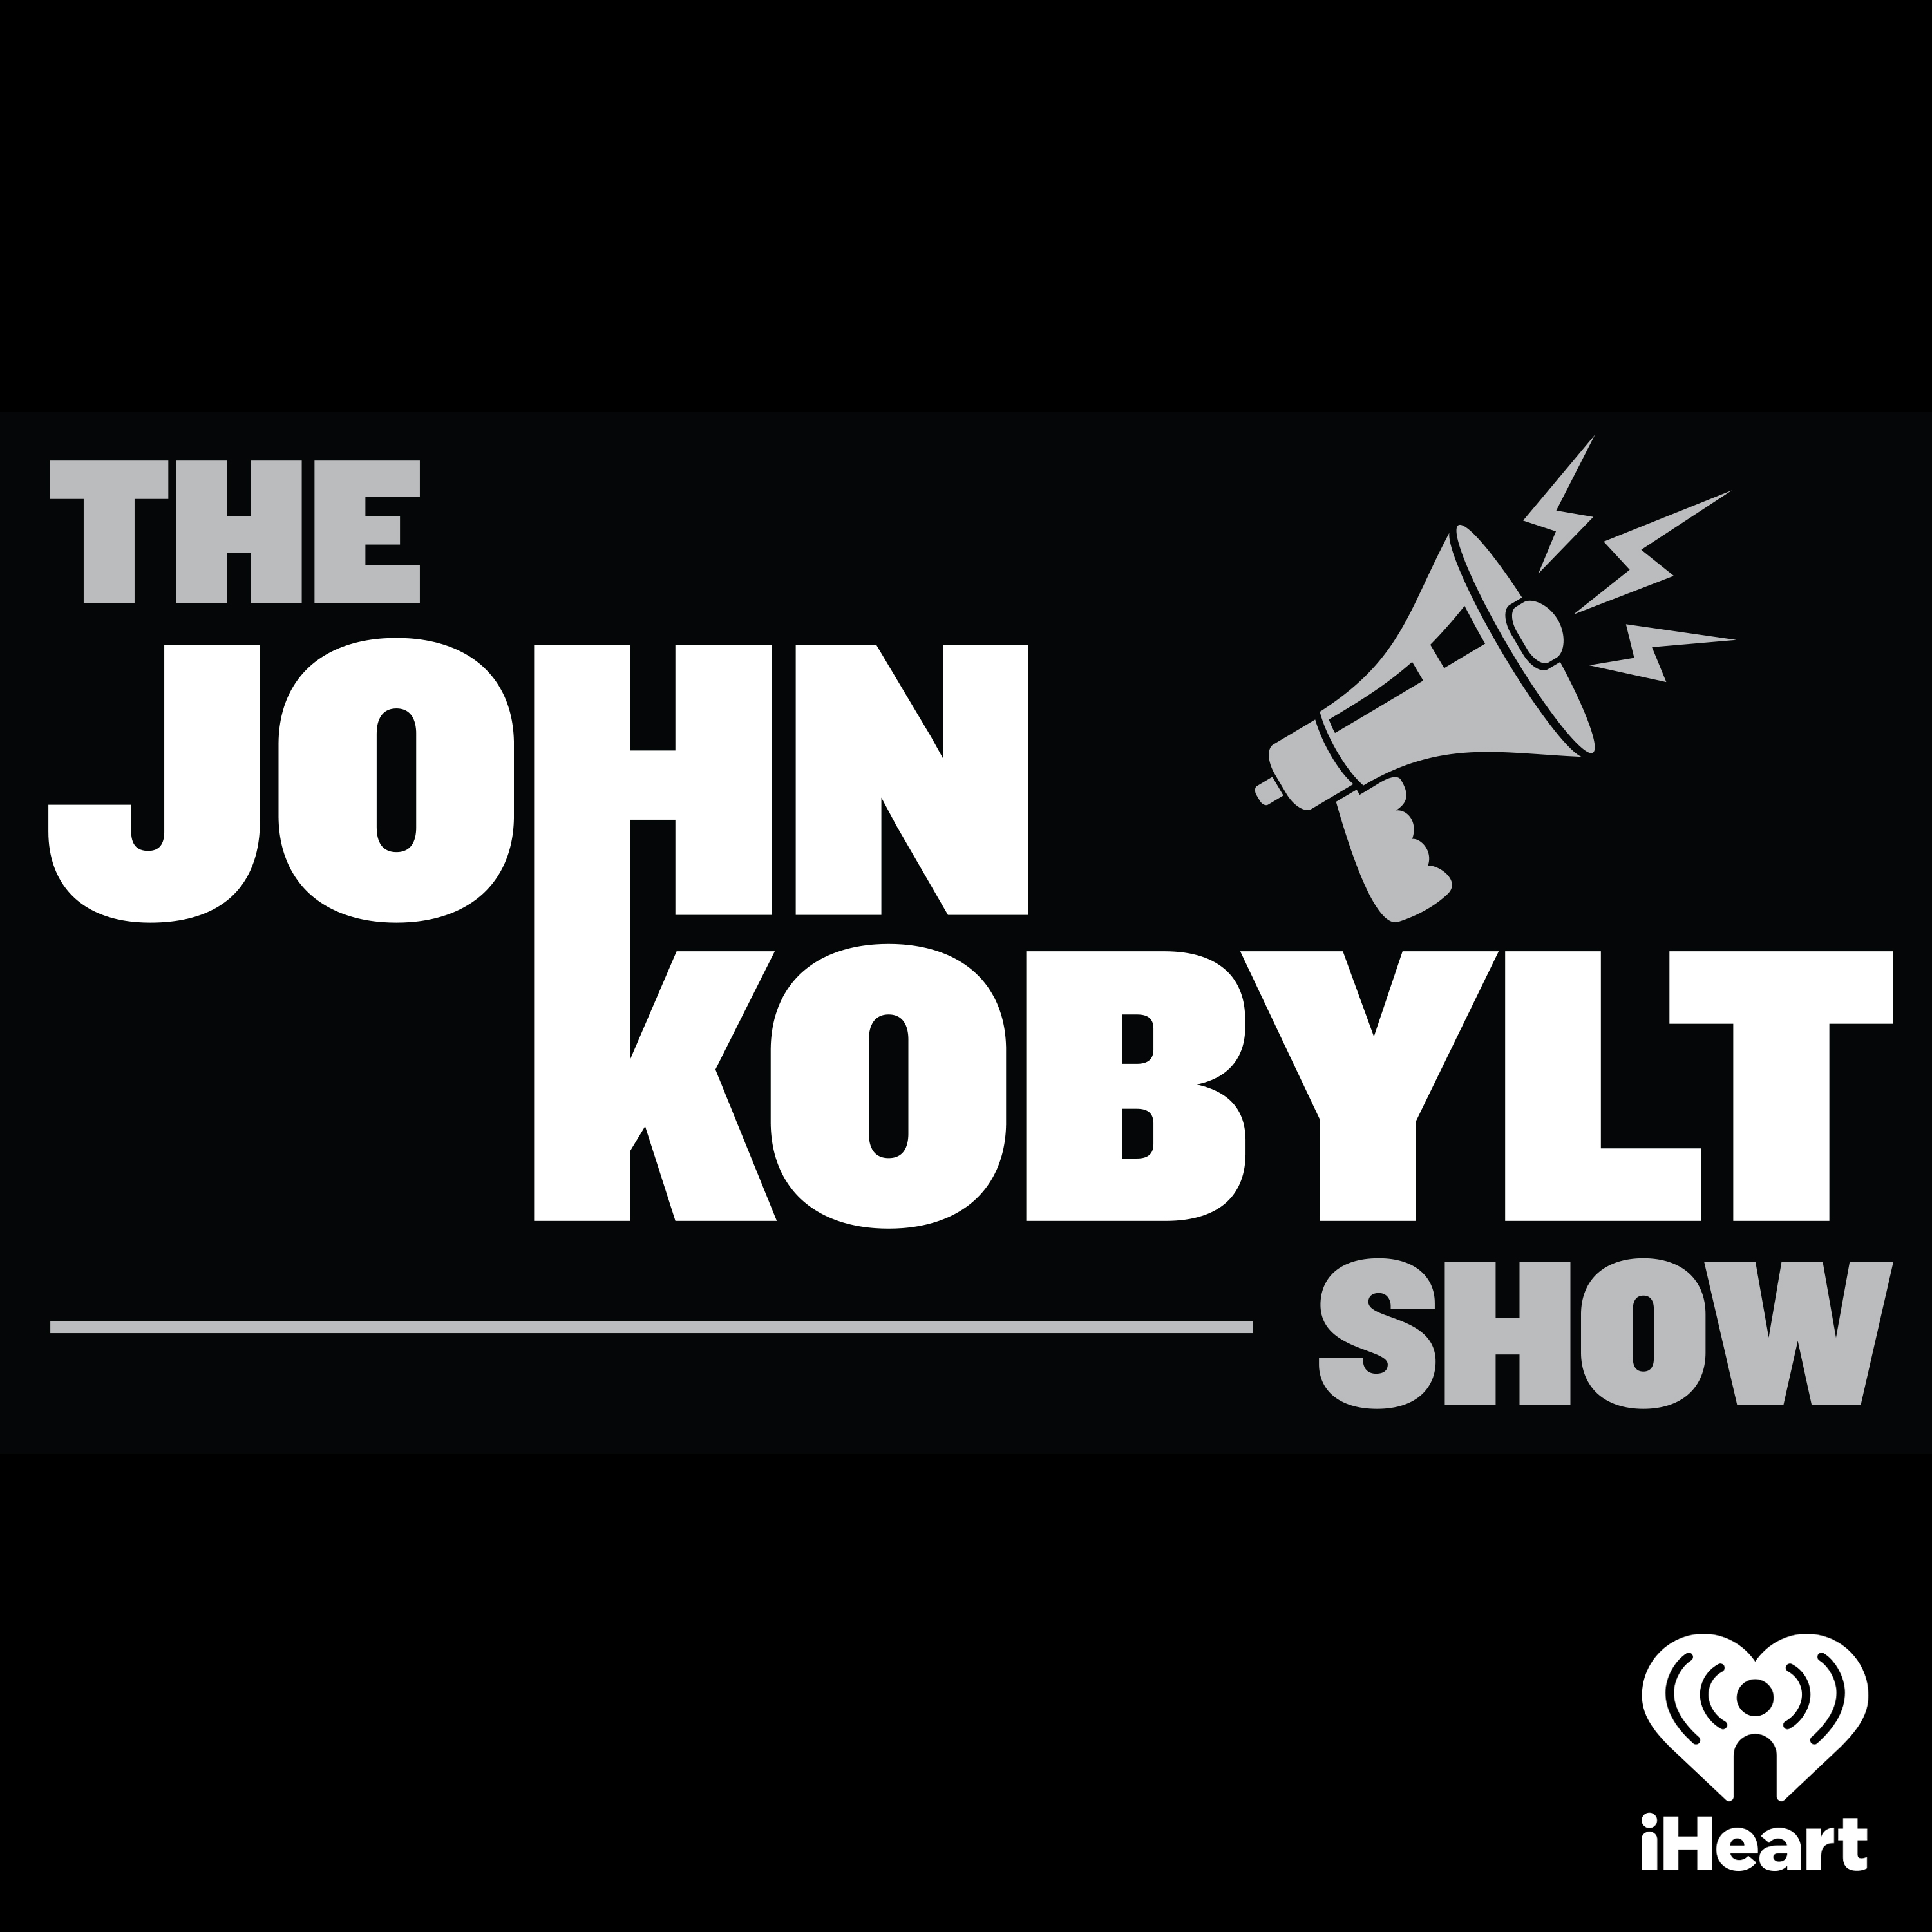 Wayne Resnick fills in for The John Kobylt Show Hour 1 (07/11) - More Calls to Drop Out